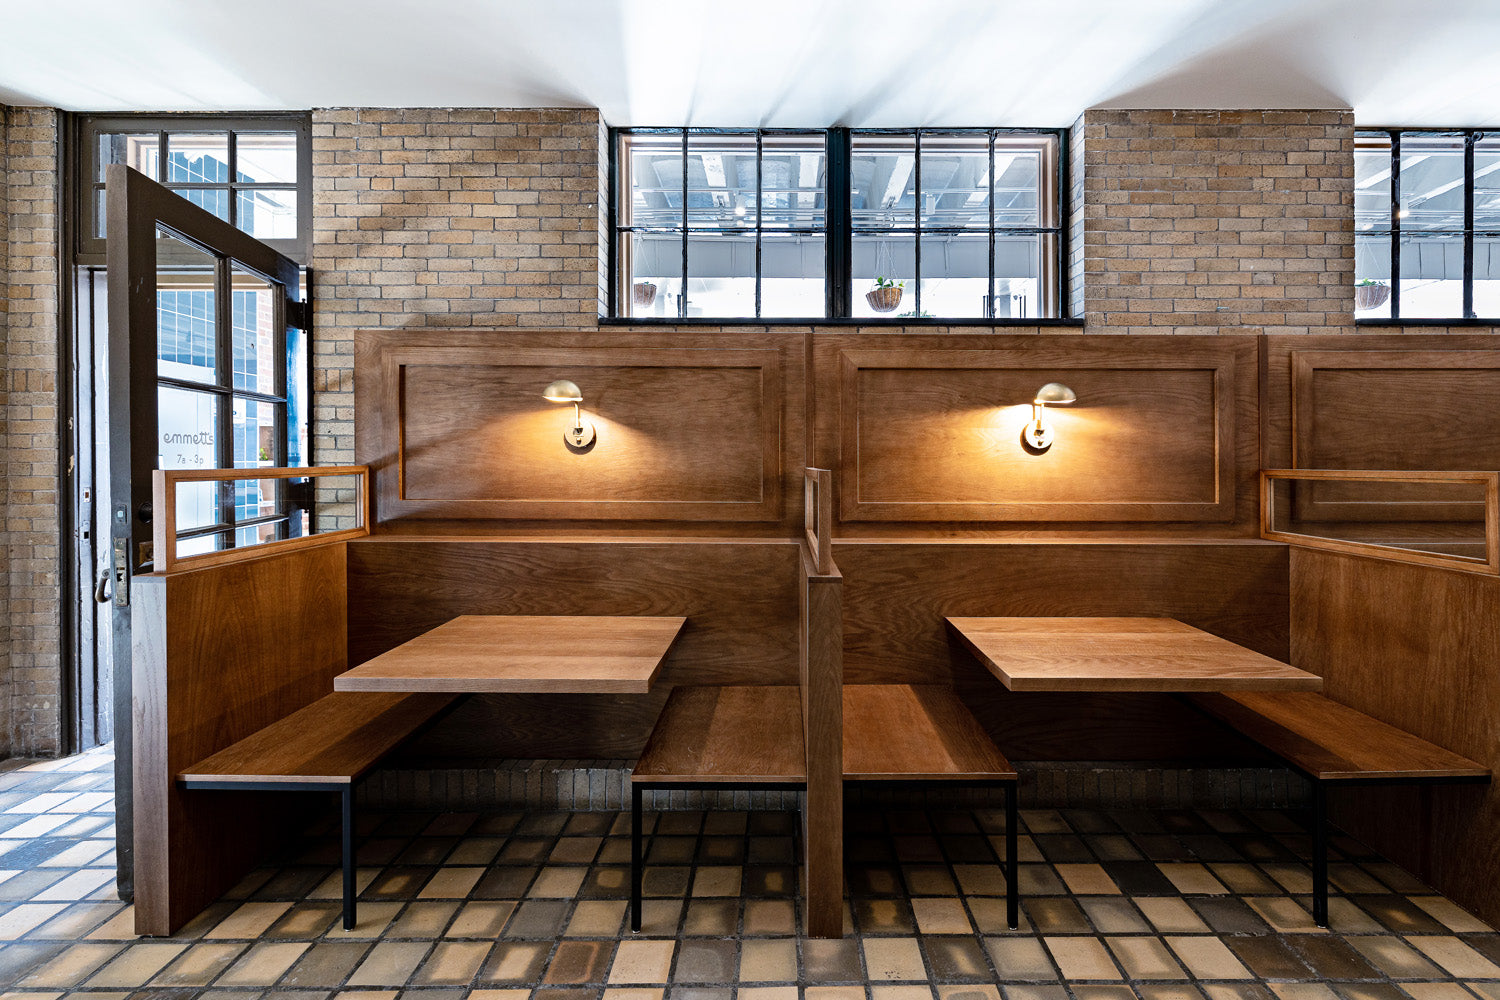 Restaurant booths and tables by Edgework Creative